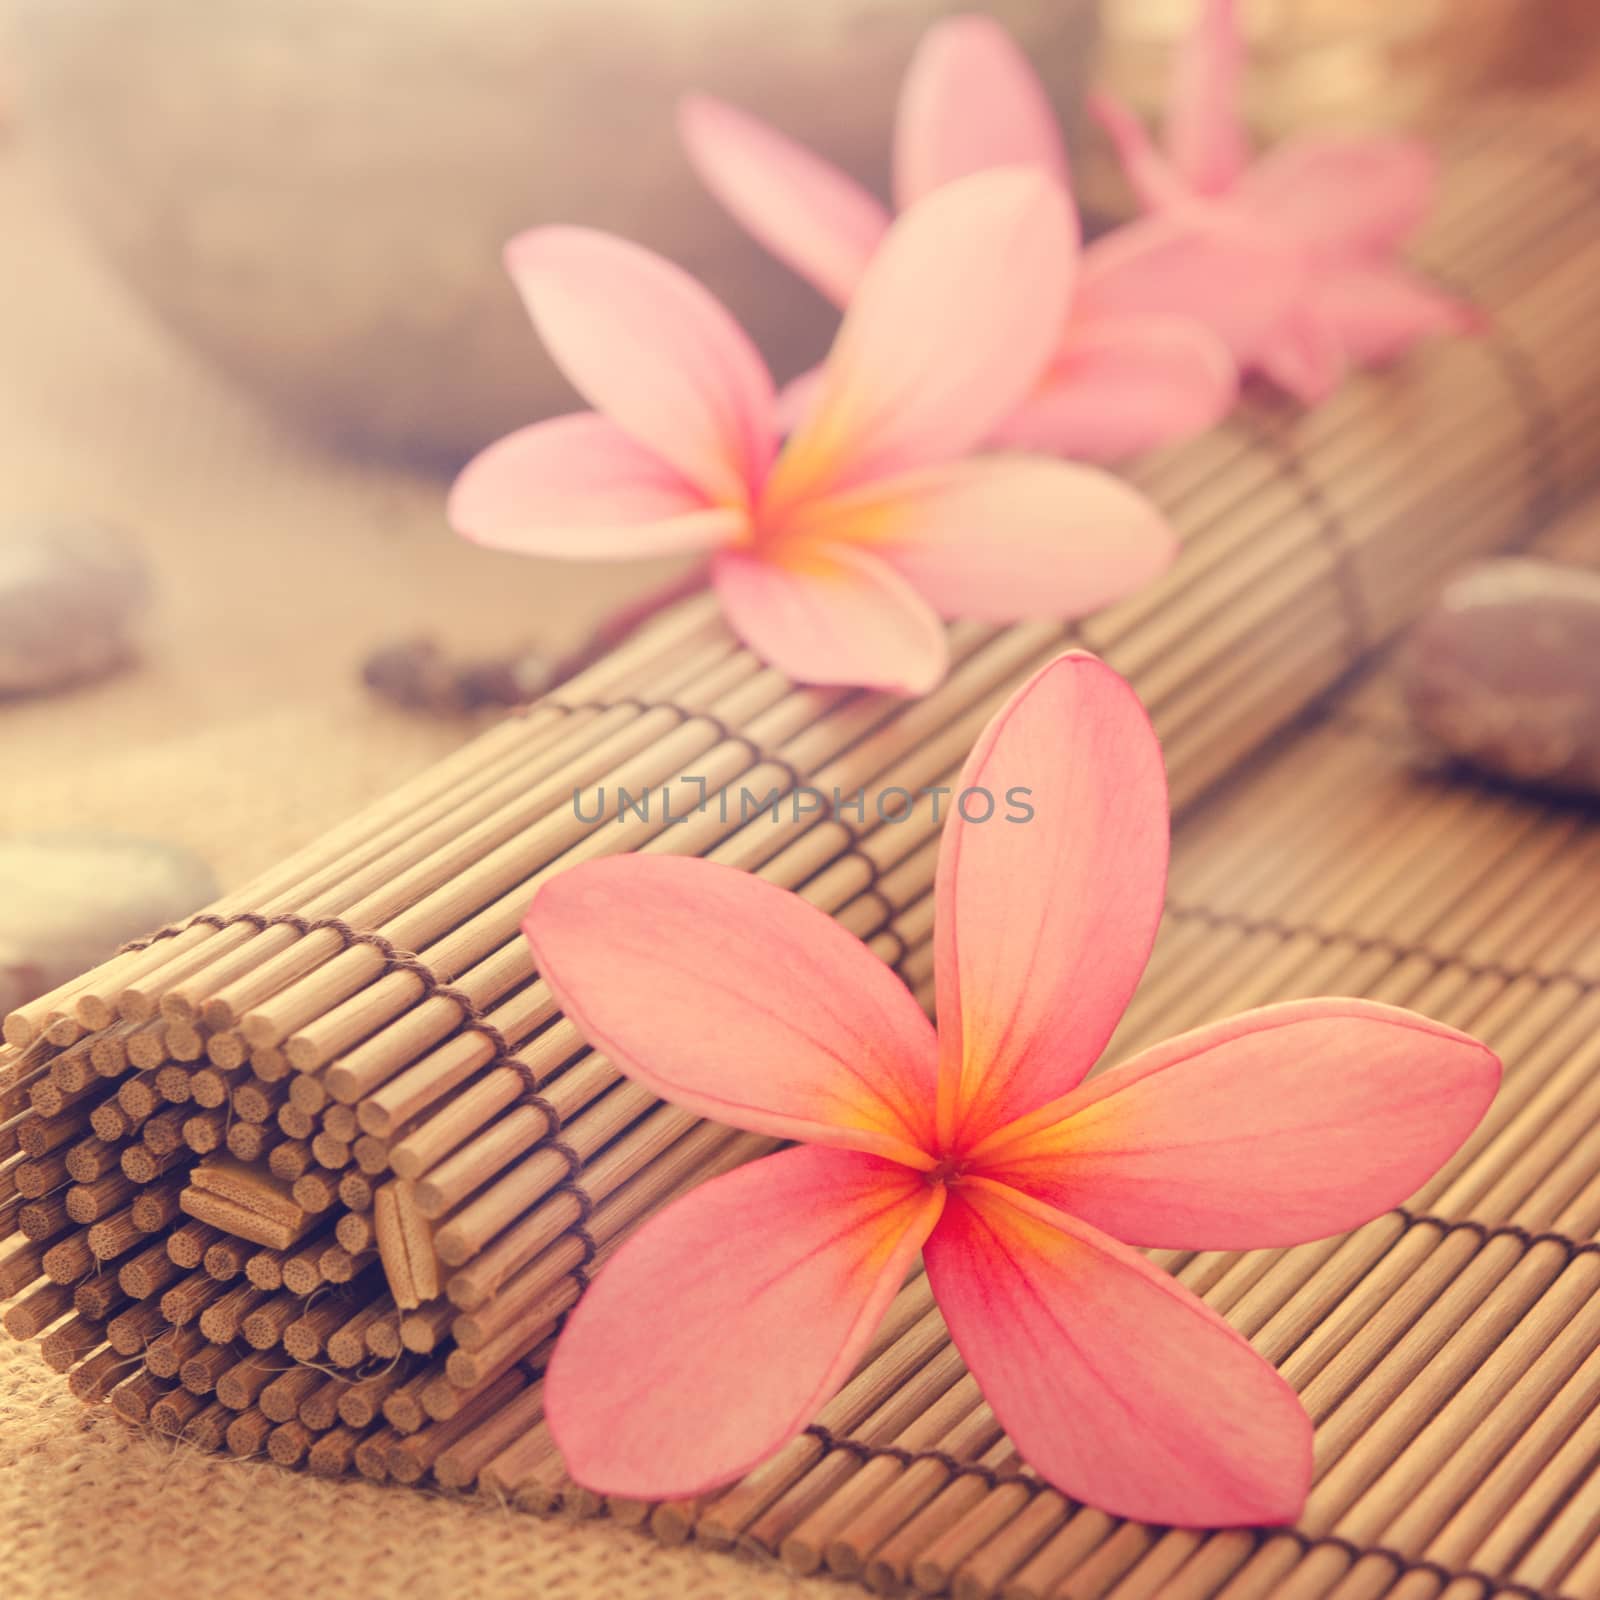 Health spa setting, low light with ambient. Frangipani, hot and cold stone on bamboo mat in vintage retro style.